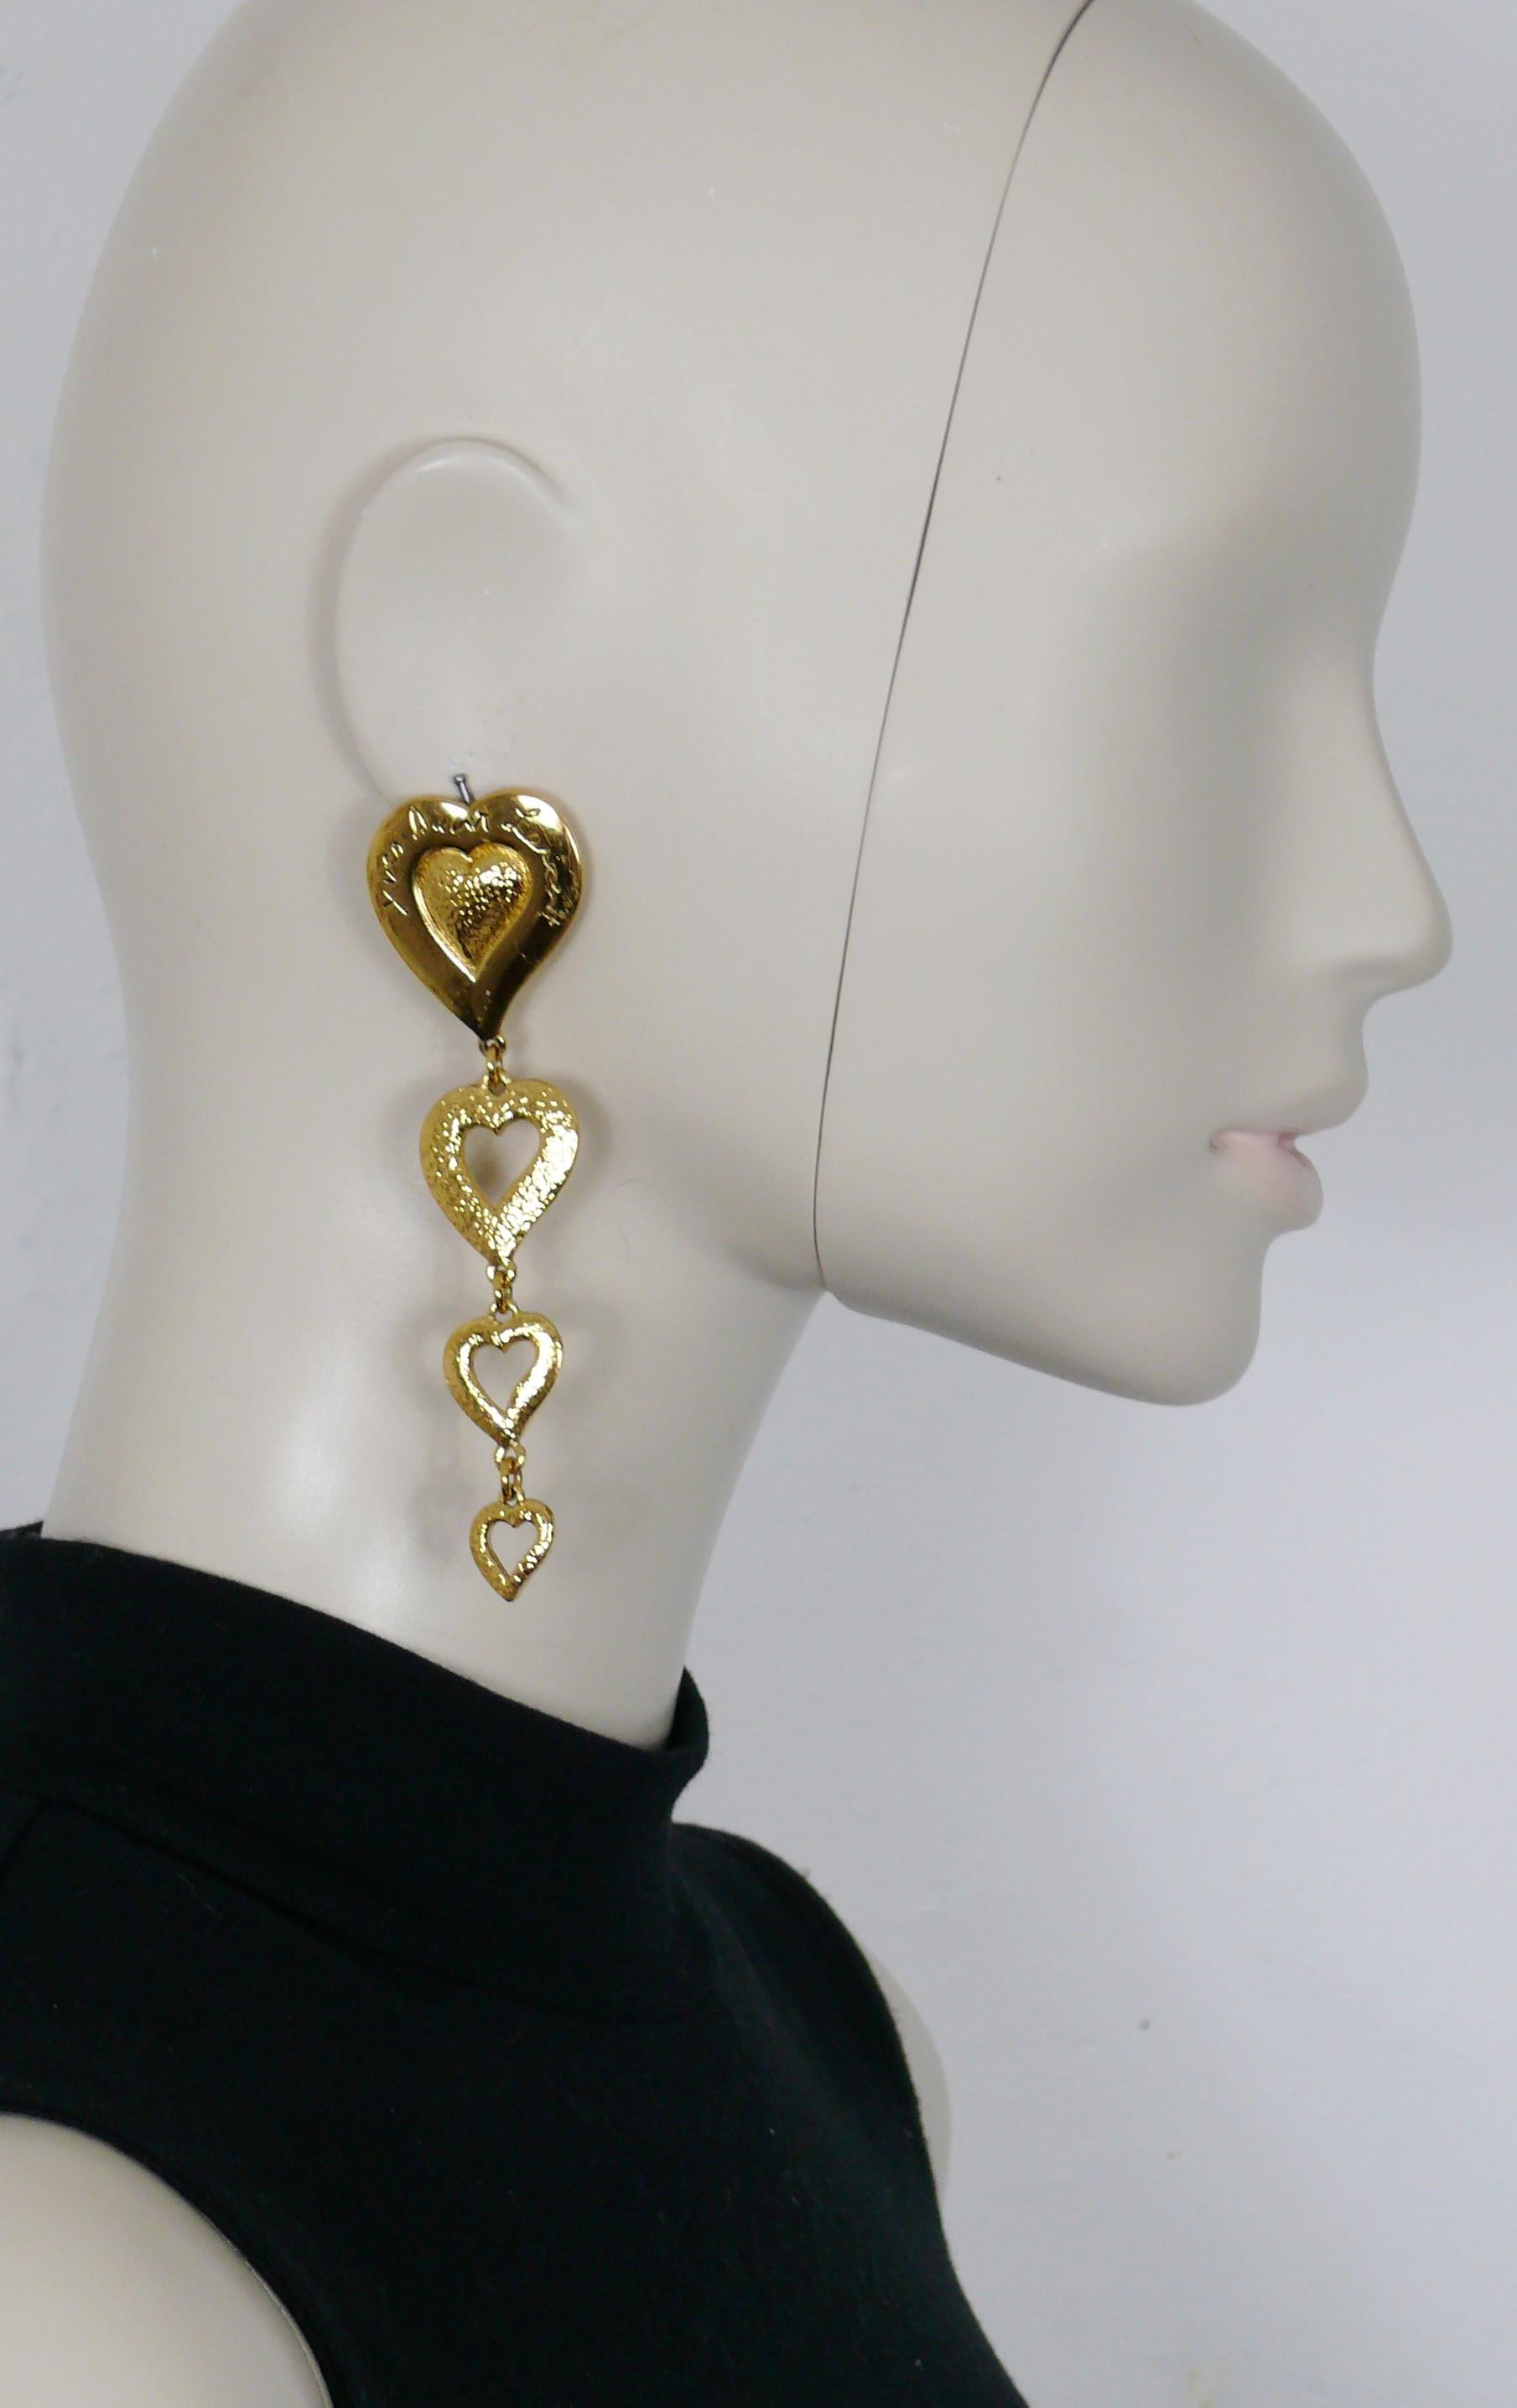 YVES SAINT LAURENT vintage gold tone dangling earrings (clip-on) featuring cascading hearts.

Embossed YSL Made in France.

Indicative measurements : height approx. 10.5 cm (4.13 inches) / max. width approx 2.8 cm (1.10 inches).

Weight per earring